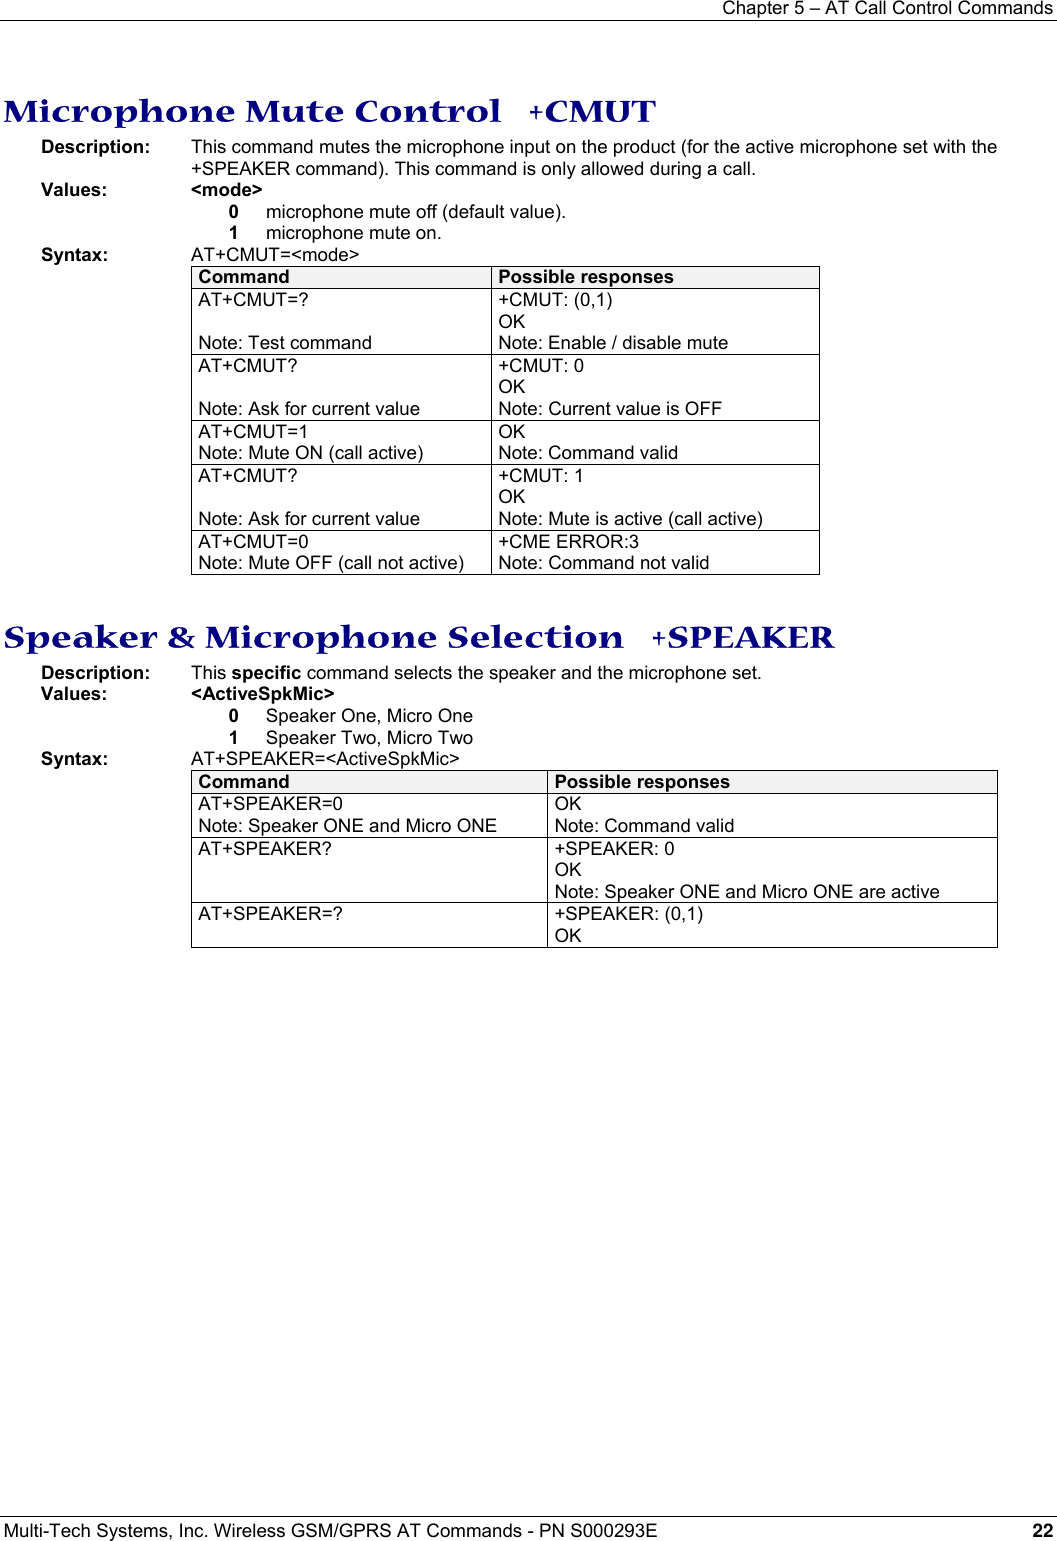 Chapter 5 – AT Call Control Commands Multi-Tech Systems, Inc. Wireless GSM/GPRS AT Commands - PN S000293E 22   Microphone Mute Control   +CMUT Description:  This command mutes the microphone input on the product (for the active microphone set with the +SPEAKER command). This command is only allowed during a call.    Values: &lt;mode&gt;   0 microphone mute off (default value).  1 microphone mute on. Syntax:    AT+CMUT=&lt;mode&gt; Command  Possible responses AT+CMUT=?  Note: Test command +CMUT: (0,1) OK Note: Enable / disable mute AT+CMUT?  Note: Ask for current value +CMUT: 0 OK Note: Current value is OFF AT+CMUT=1 Note: Mute ON (call active) OK Note: Command valid AT+CMUT?  Note: Ask for current value +CMUT: 1 OK Note: Mute is active (call active) AT+CMUT=0 Note: Mute OFF (call not active) +CME ERROR:3 Note: Command not valid  Speaker &amp; Microphone Selection   +SPEAKER Description: This specific command selects the speaker and the microphone set.    Values: &lt;ActiveSpkMic&gt;   0 Speaker One, Micro One  1 Speaker Two, Micro Two Syntax:      AT+SPEAKER=&lt;ActiveSpkMic&gt; Command  Possible responses AT+SPEAKER=0 Note: Speaker ONE and Micro ONE OK Note: Command valid AT+SPEAKER?   +SPEAKER: 0 OK Note: Speaker ONE and Micro ONE are active AT+SPEAKER=? +SPEAKER: (0,1) OK  